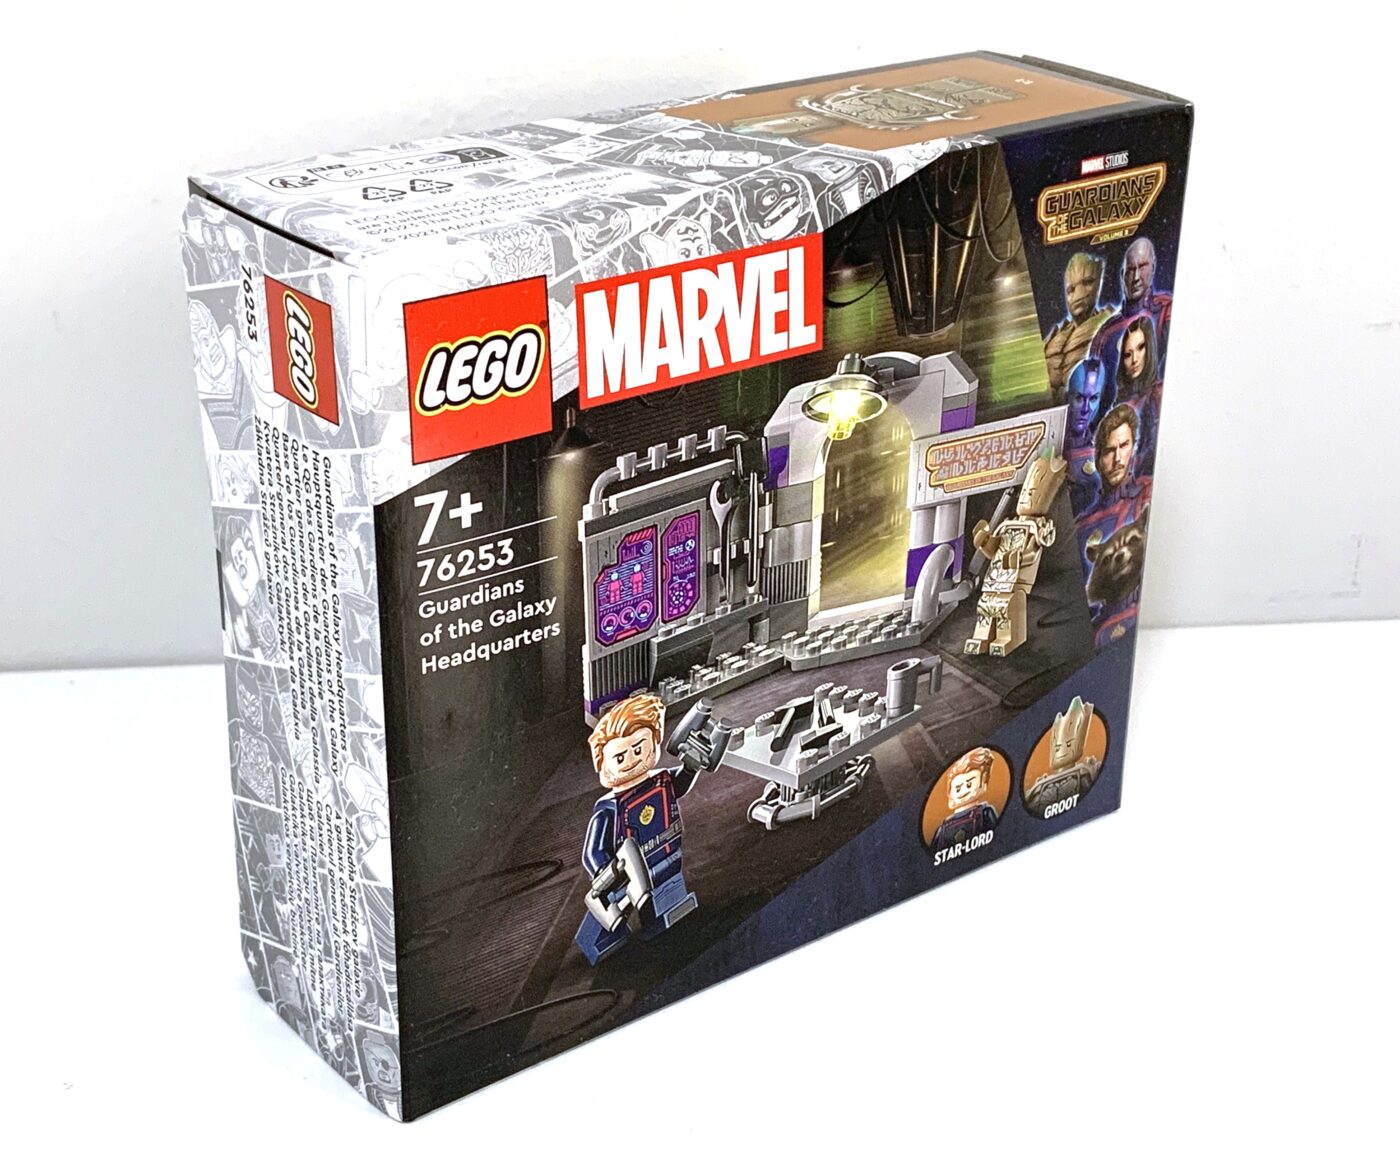 Galaxy Jay\'s of Review: 76253 Headquarters the Brick Blog Guardians - LEGO